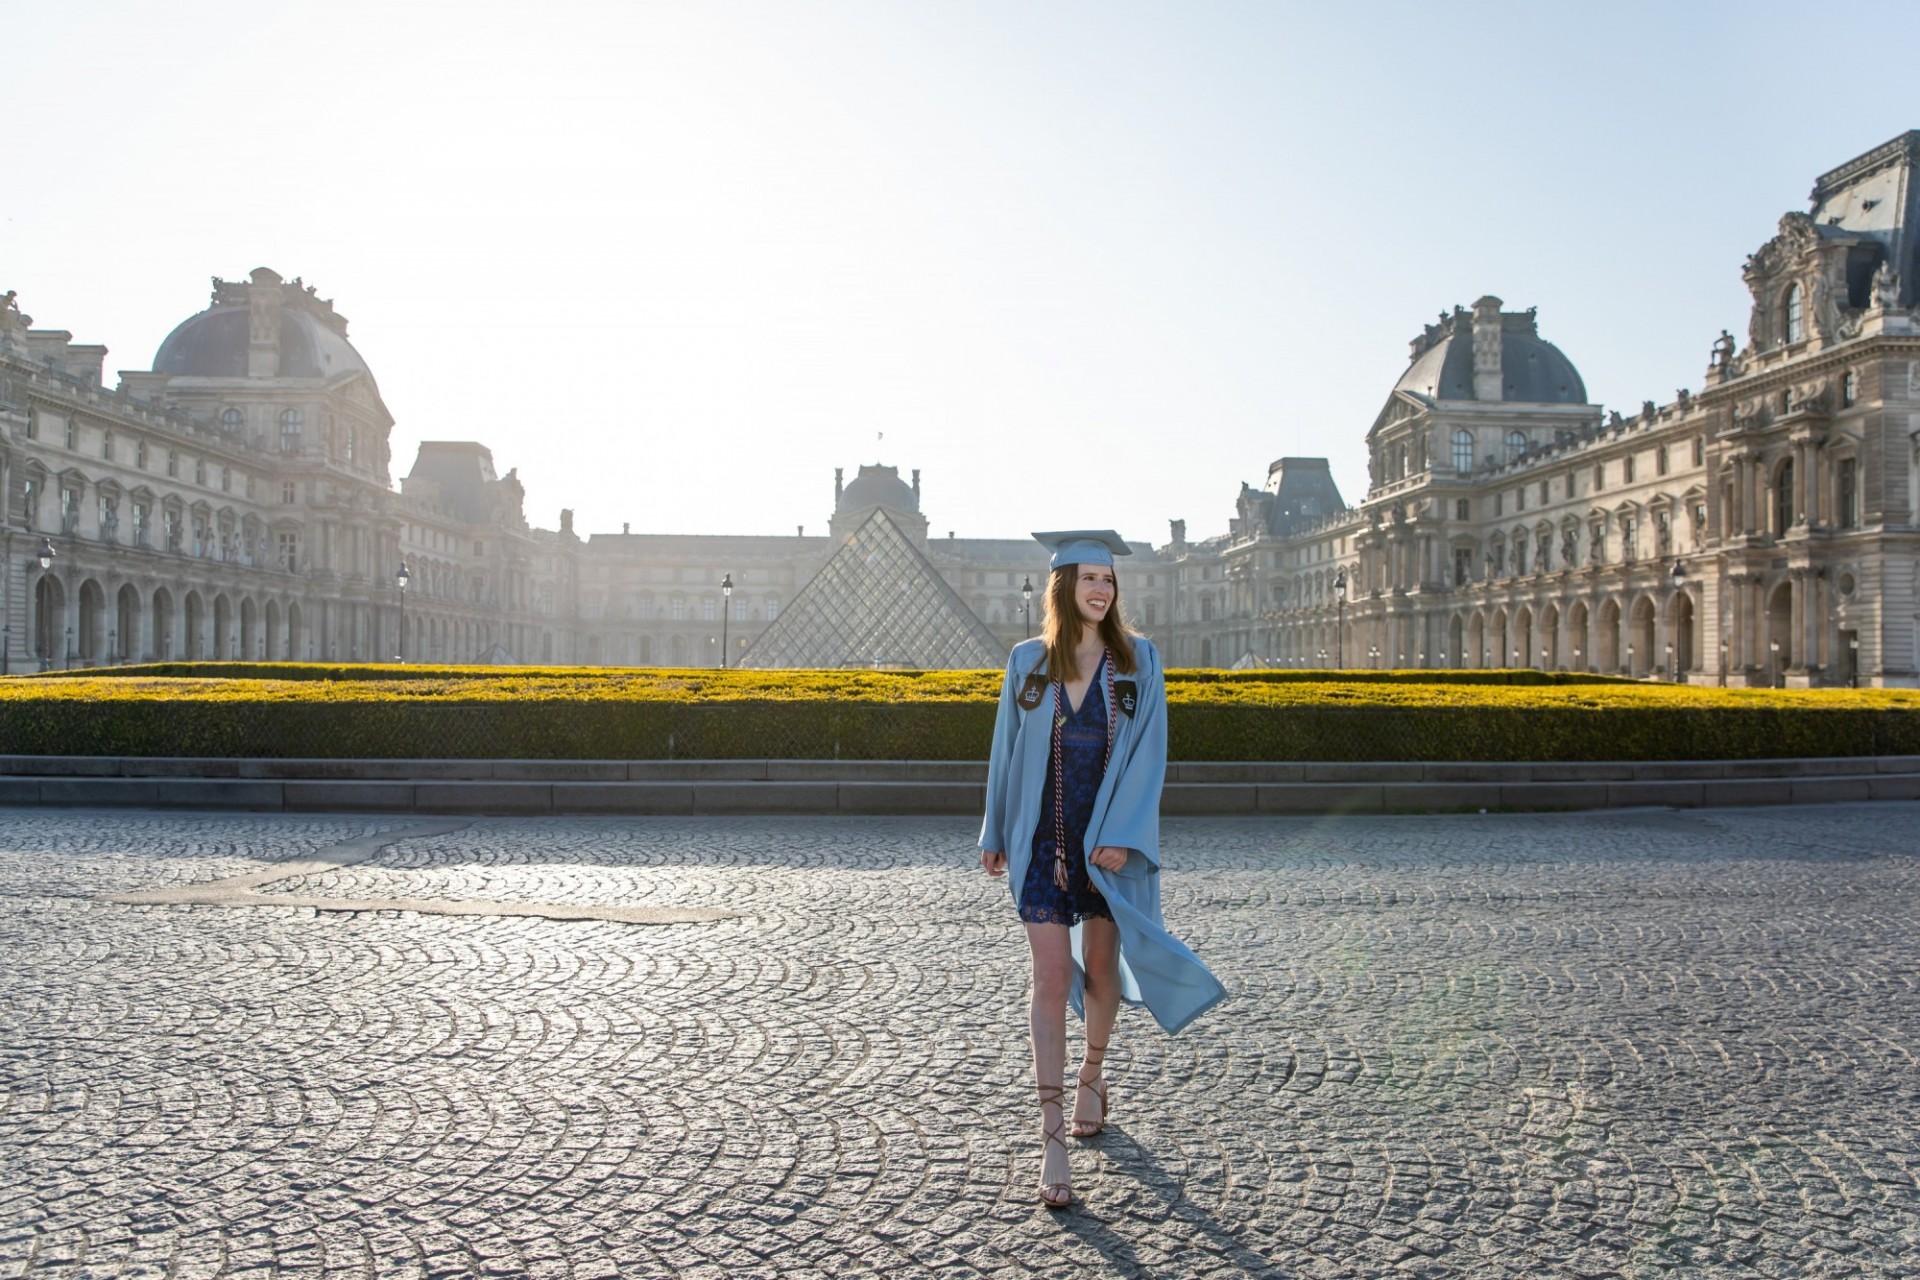 A columbia student in regalia poses in front of the louvre. 